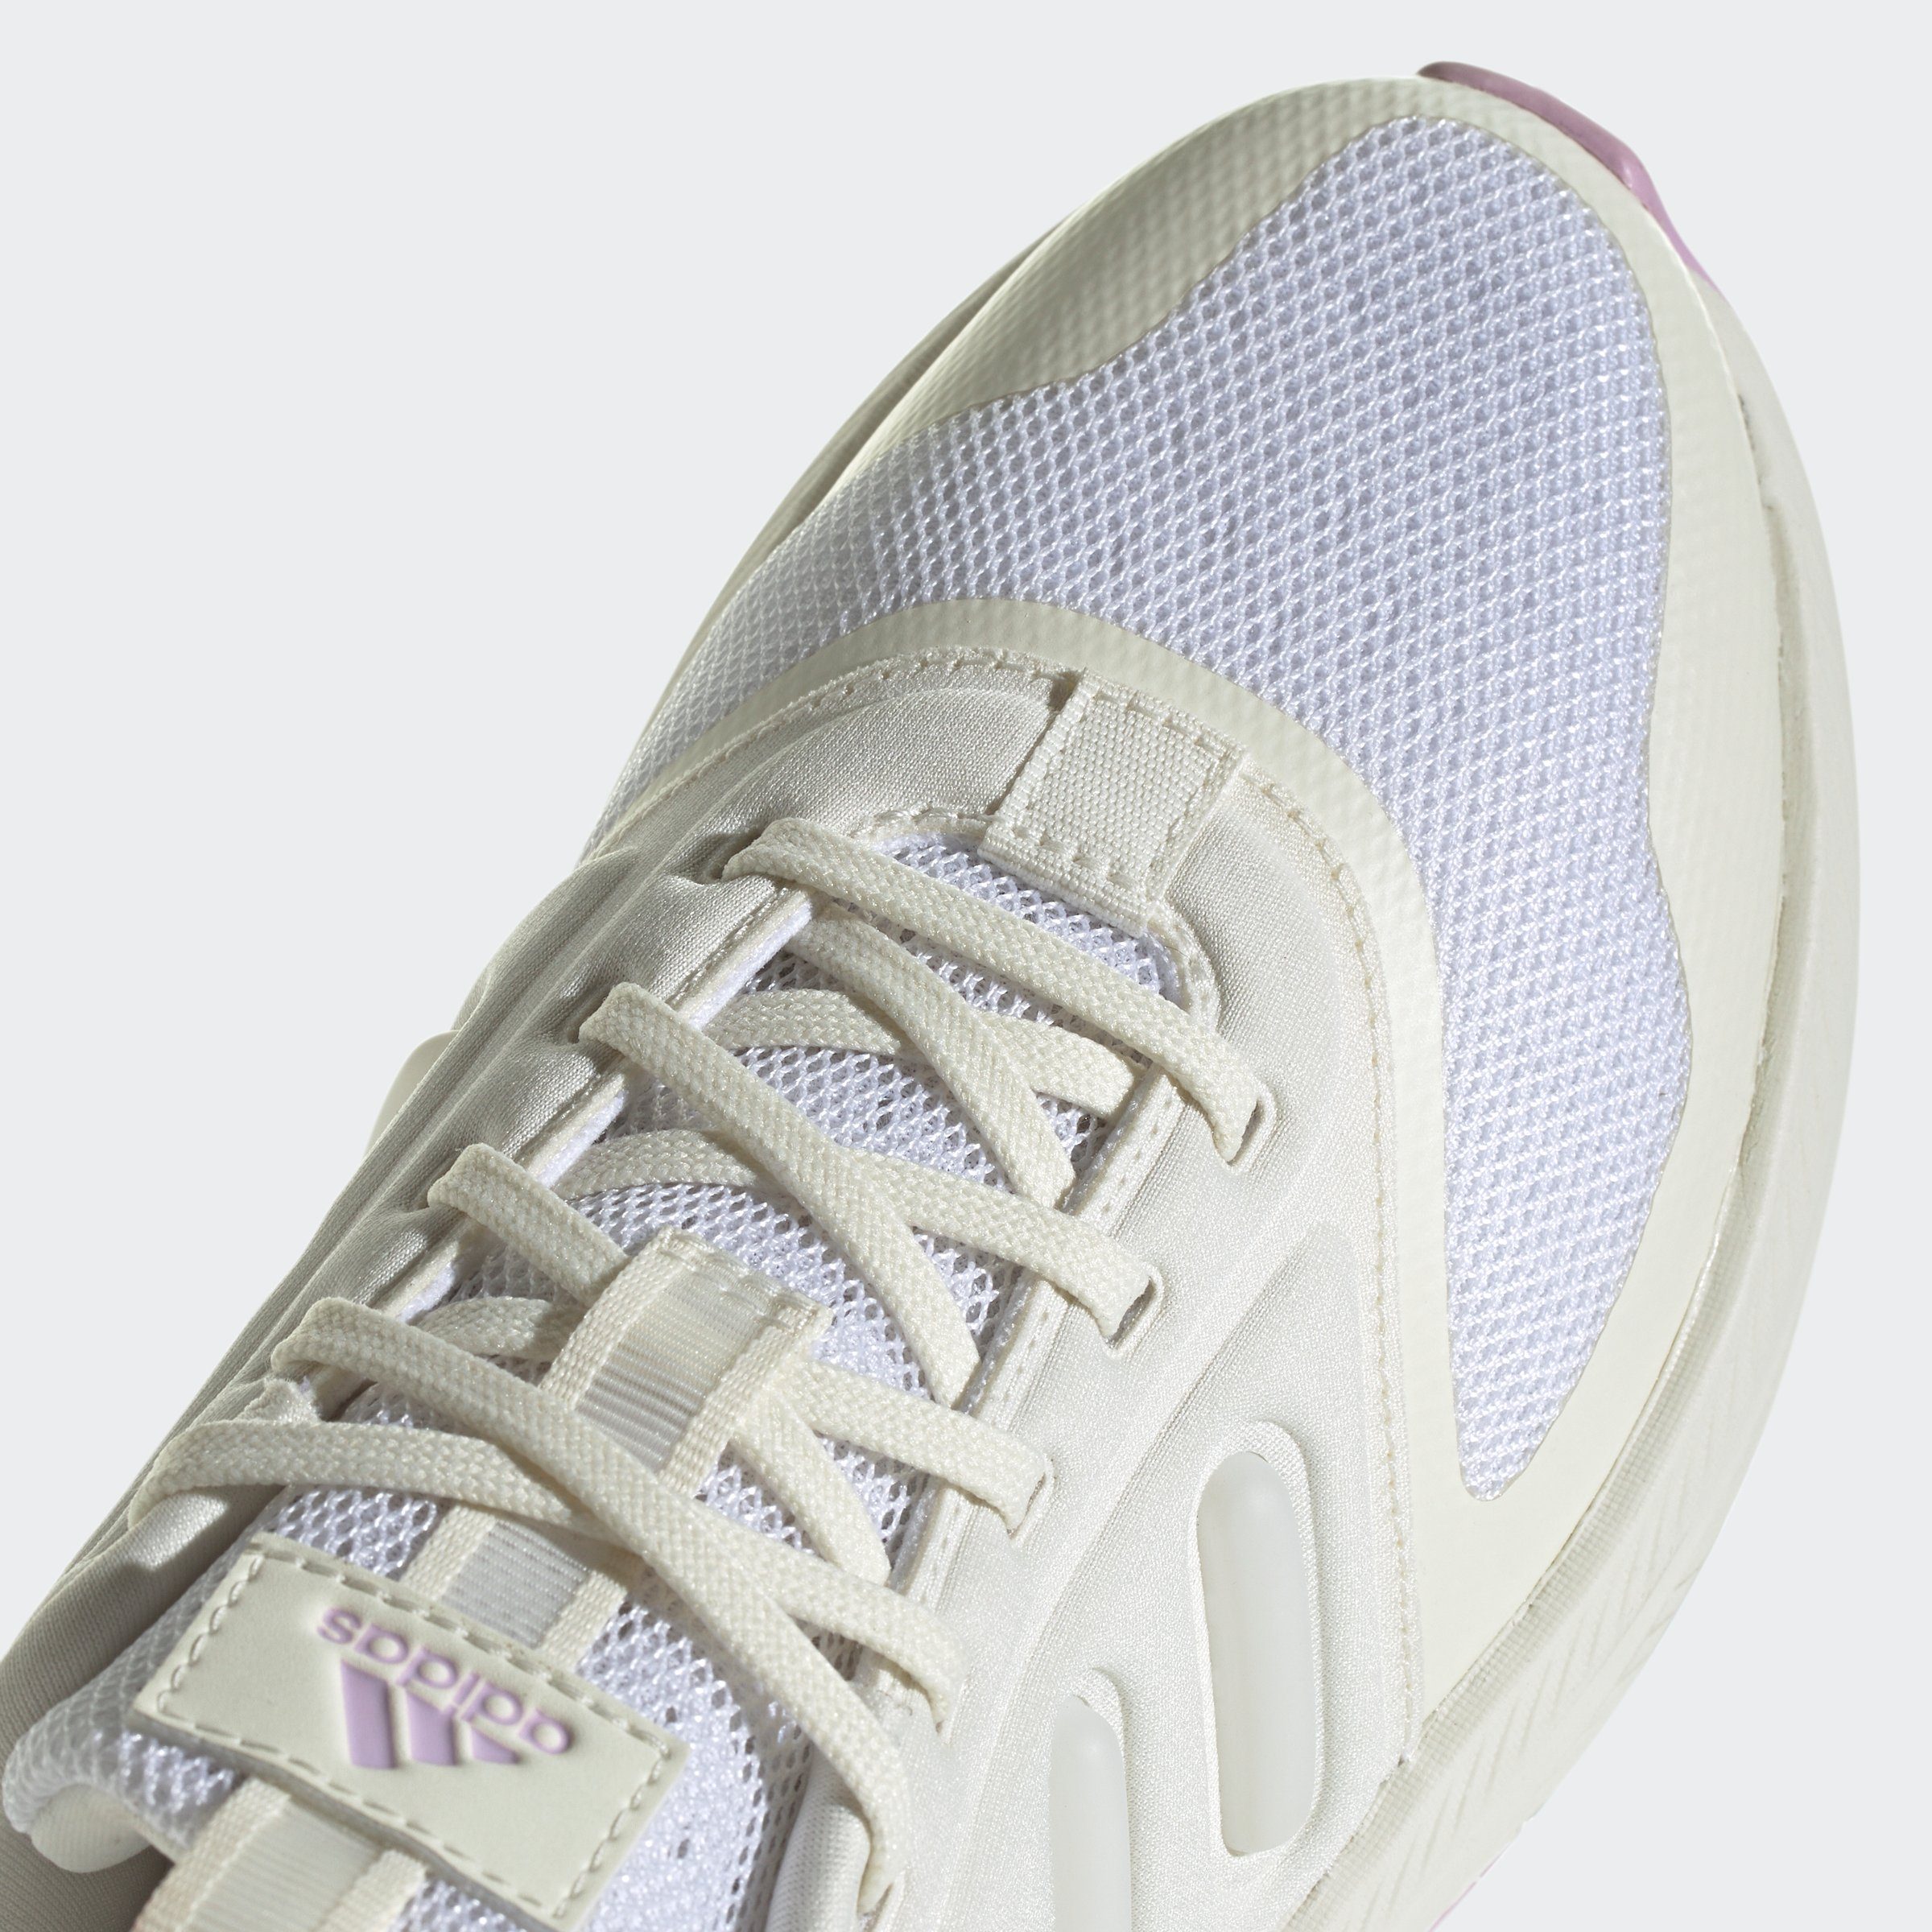 Bliss X_PLR Off Off Sneaker White Sportswear / PHASE Lilac adidas White /